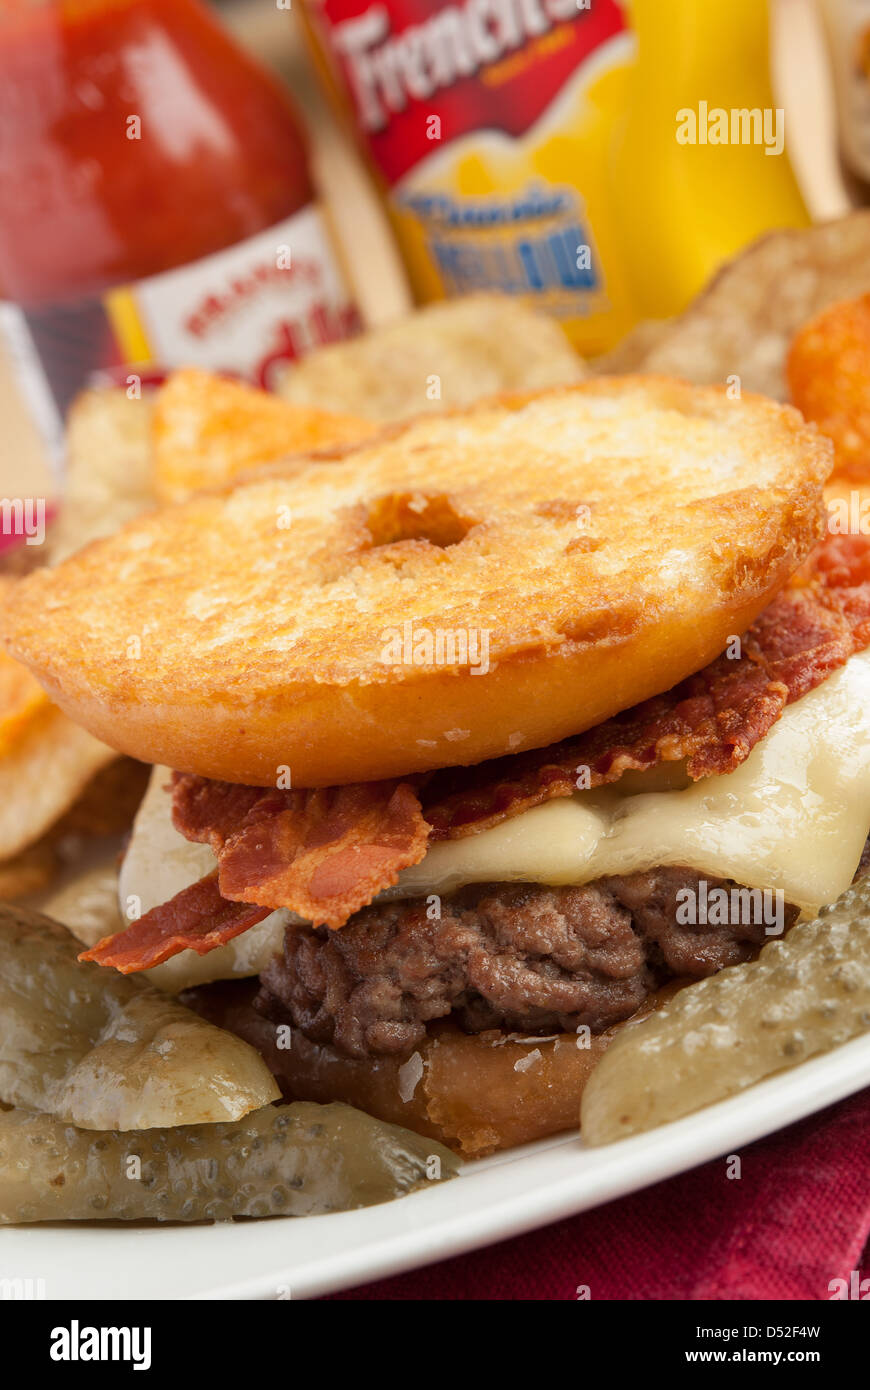 A burger, with a glazed ring doughnut instead of a bap (aka the Luther burger). Stock Photo